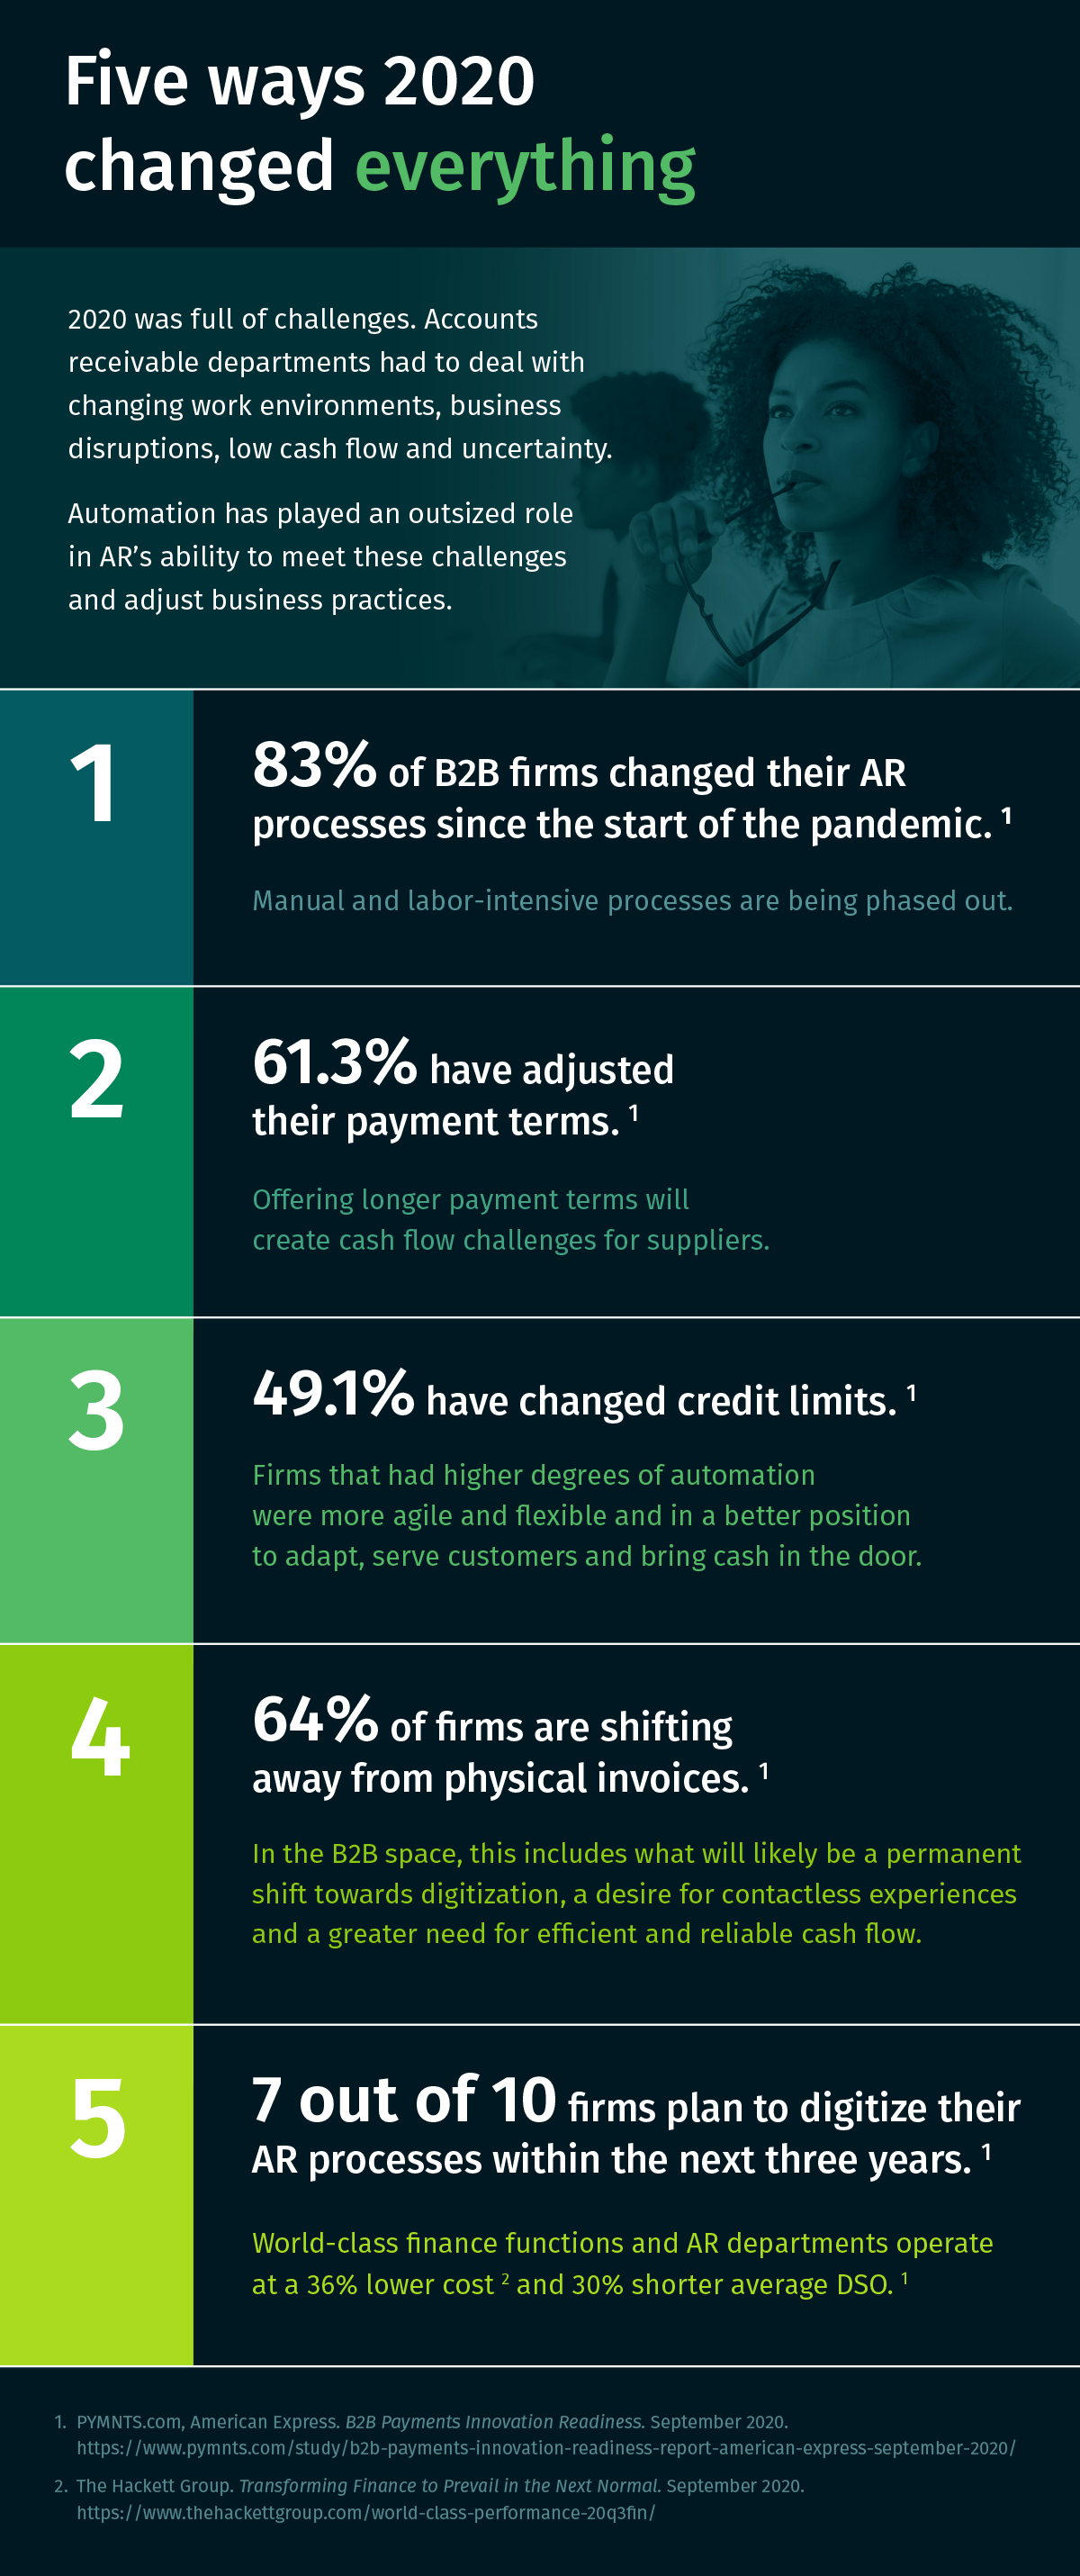 Five ways 2020 changed everything infographic